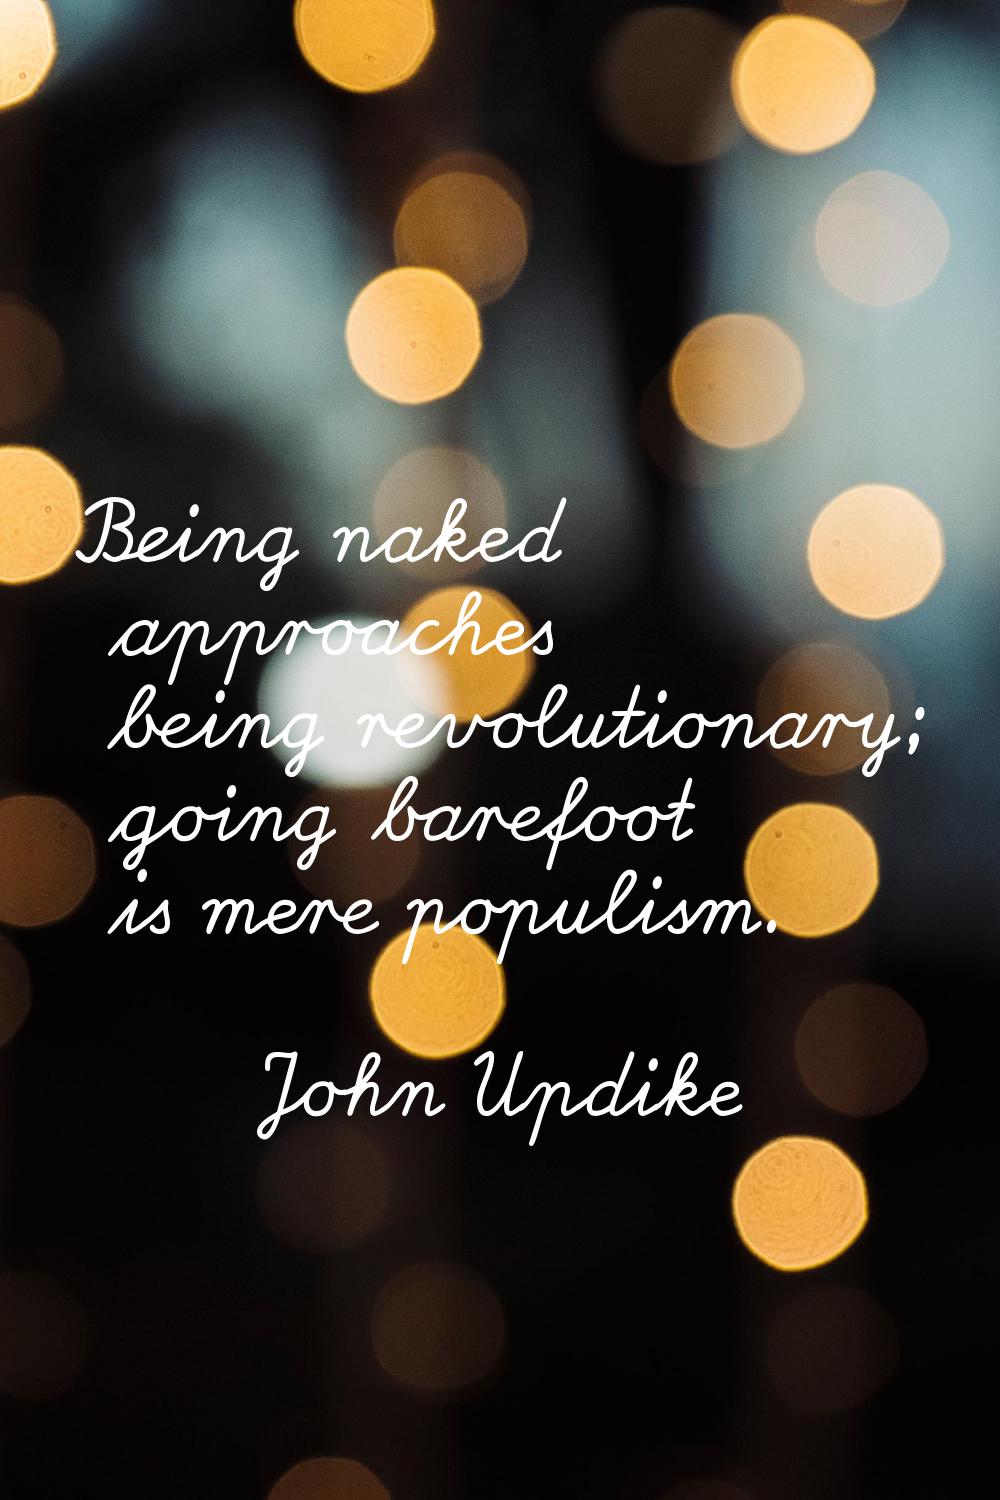 Being naked approaches being revolutionary; going barefoot is mere populism.